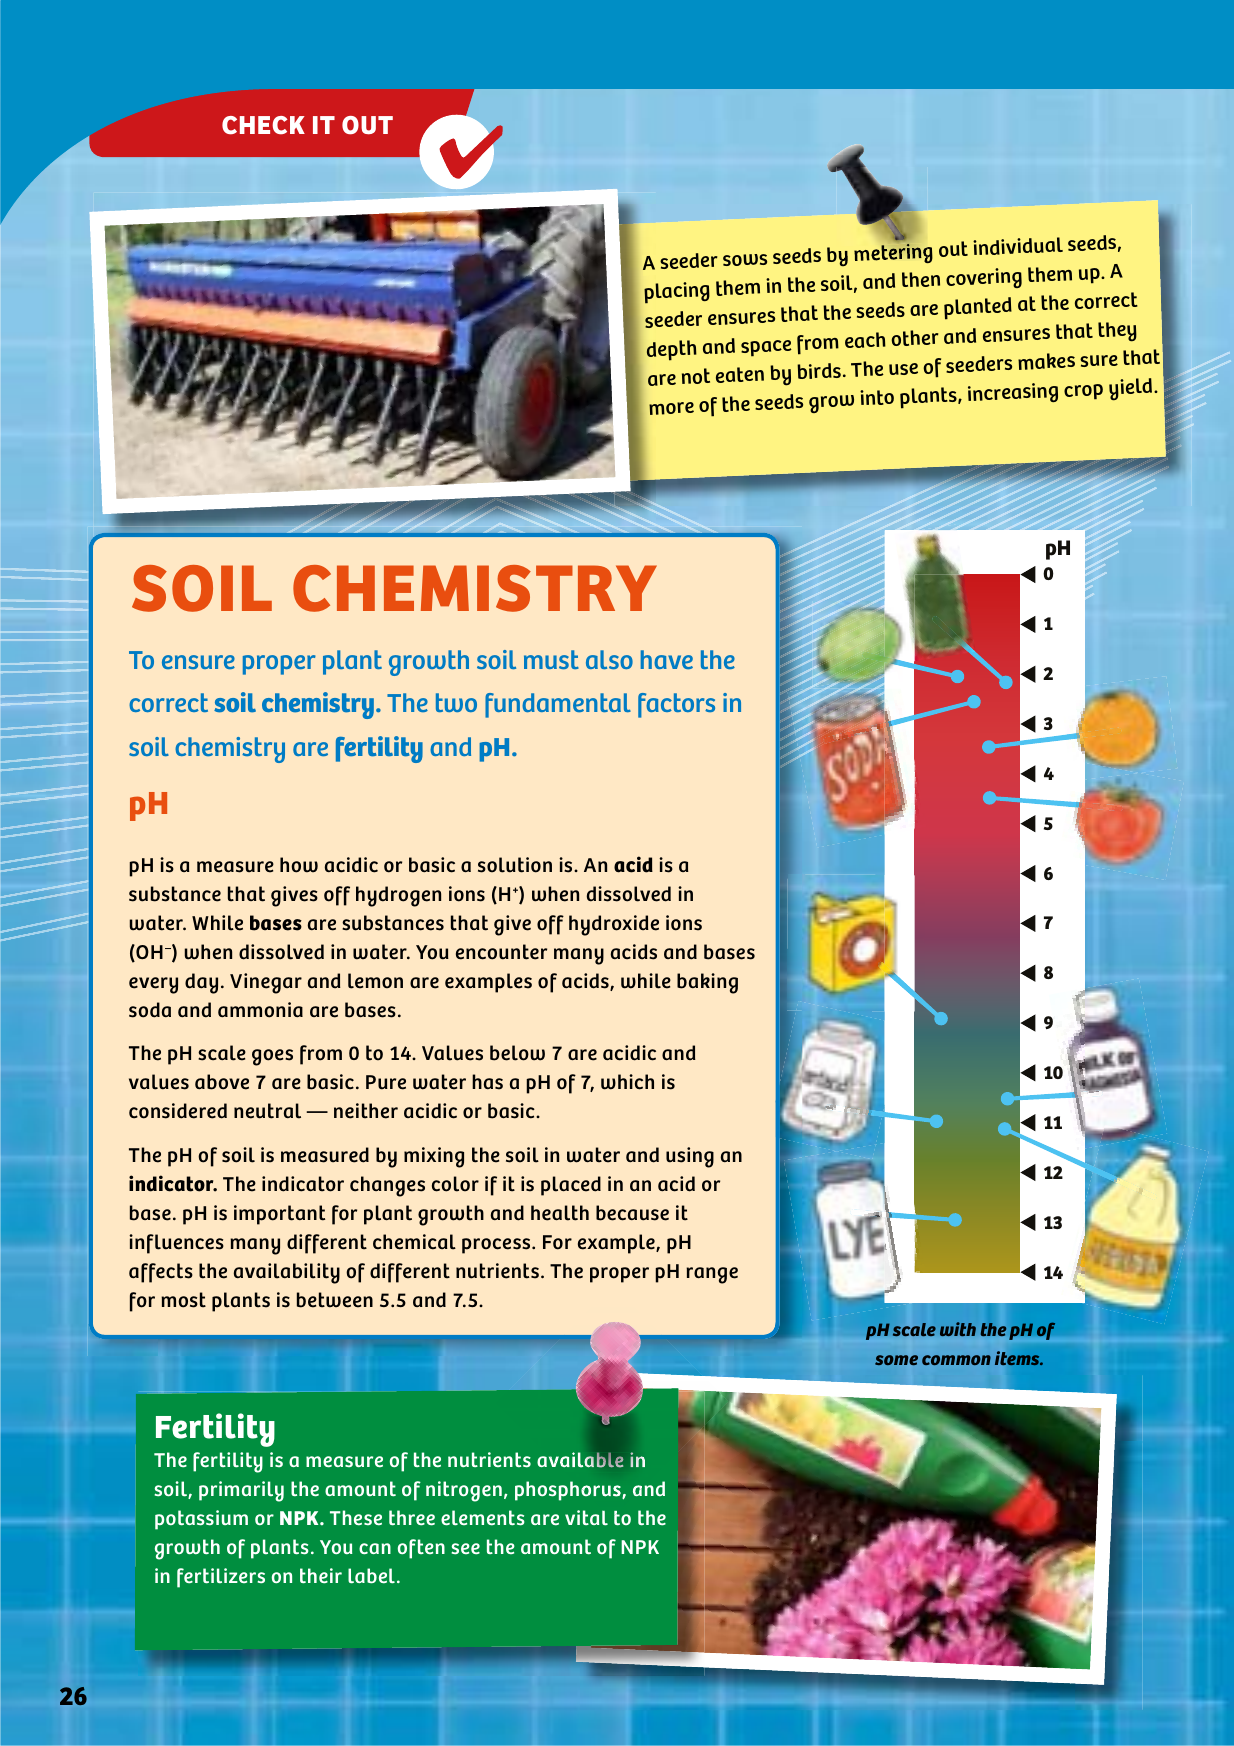 pH scale with the pH of some common items.To ensure proper plant growth soil must also have the correct soil chemistry. The two fundamental factors in soil chemistry are fertility and pH.SOIL CHEMISTRYpH is a measure how acidic or basic a solution is. An acid is a substance that gives off hydrogen ions (H+) when dissolved in water. While bases are substances that give off hydroxide ions (OH–) when dissolved in water. You encounter many acids and bases every day. Vinegar and lemon are examples of acids, while baking soda and ammonia are bases.The pH scale goes from  to . Values below  are acidic and values above  are basic. Pure water has a pH of , which is considered neutral — neither acidic or basic.The pH of soil is measured by mixing the soil in water and using an indicator. The indicator changes color if it is placed in an acid or base. pH is important for plant growth and health because it influences many different chemical process. For example, pH affects the availability of different nutrients. The proper pH range for most plants is between . and ..pHpH01234567891011121314The fertility is a measure of the nutrients available in soil, primarily the amount of nitrogen, phosphorus, and potassium or NPK. These three elements are vital to the growth of plants. You can often see the amount of NPK in fertilizers on their label.FertilityA seeder sows seeds by metering out individual seeds, placing them in the soil, and then covering them up. A seeder ensures that the seeds are planted at the correct depth and space from each other and ensures that they are not eaten by birds. The use of seeders makes sure that more of the seeds grow into plants, increasing crop yield.CHECK IT OUT